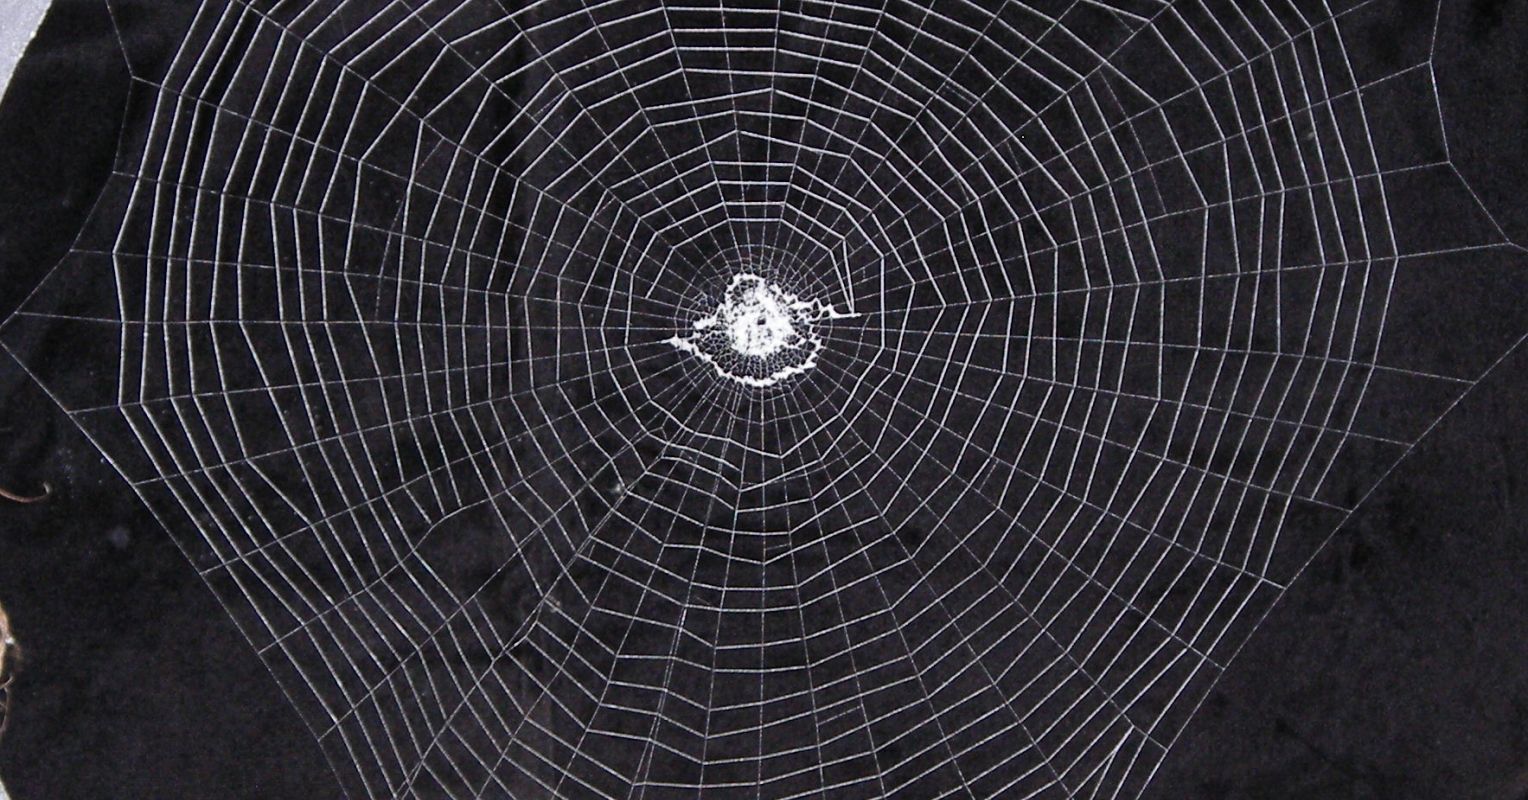 Spiders think with their webs, challenging our ideas of